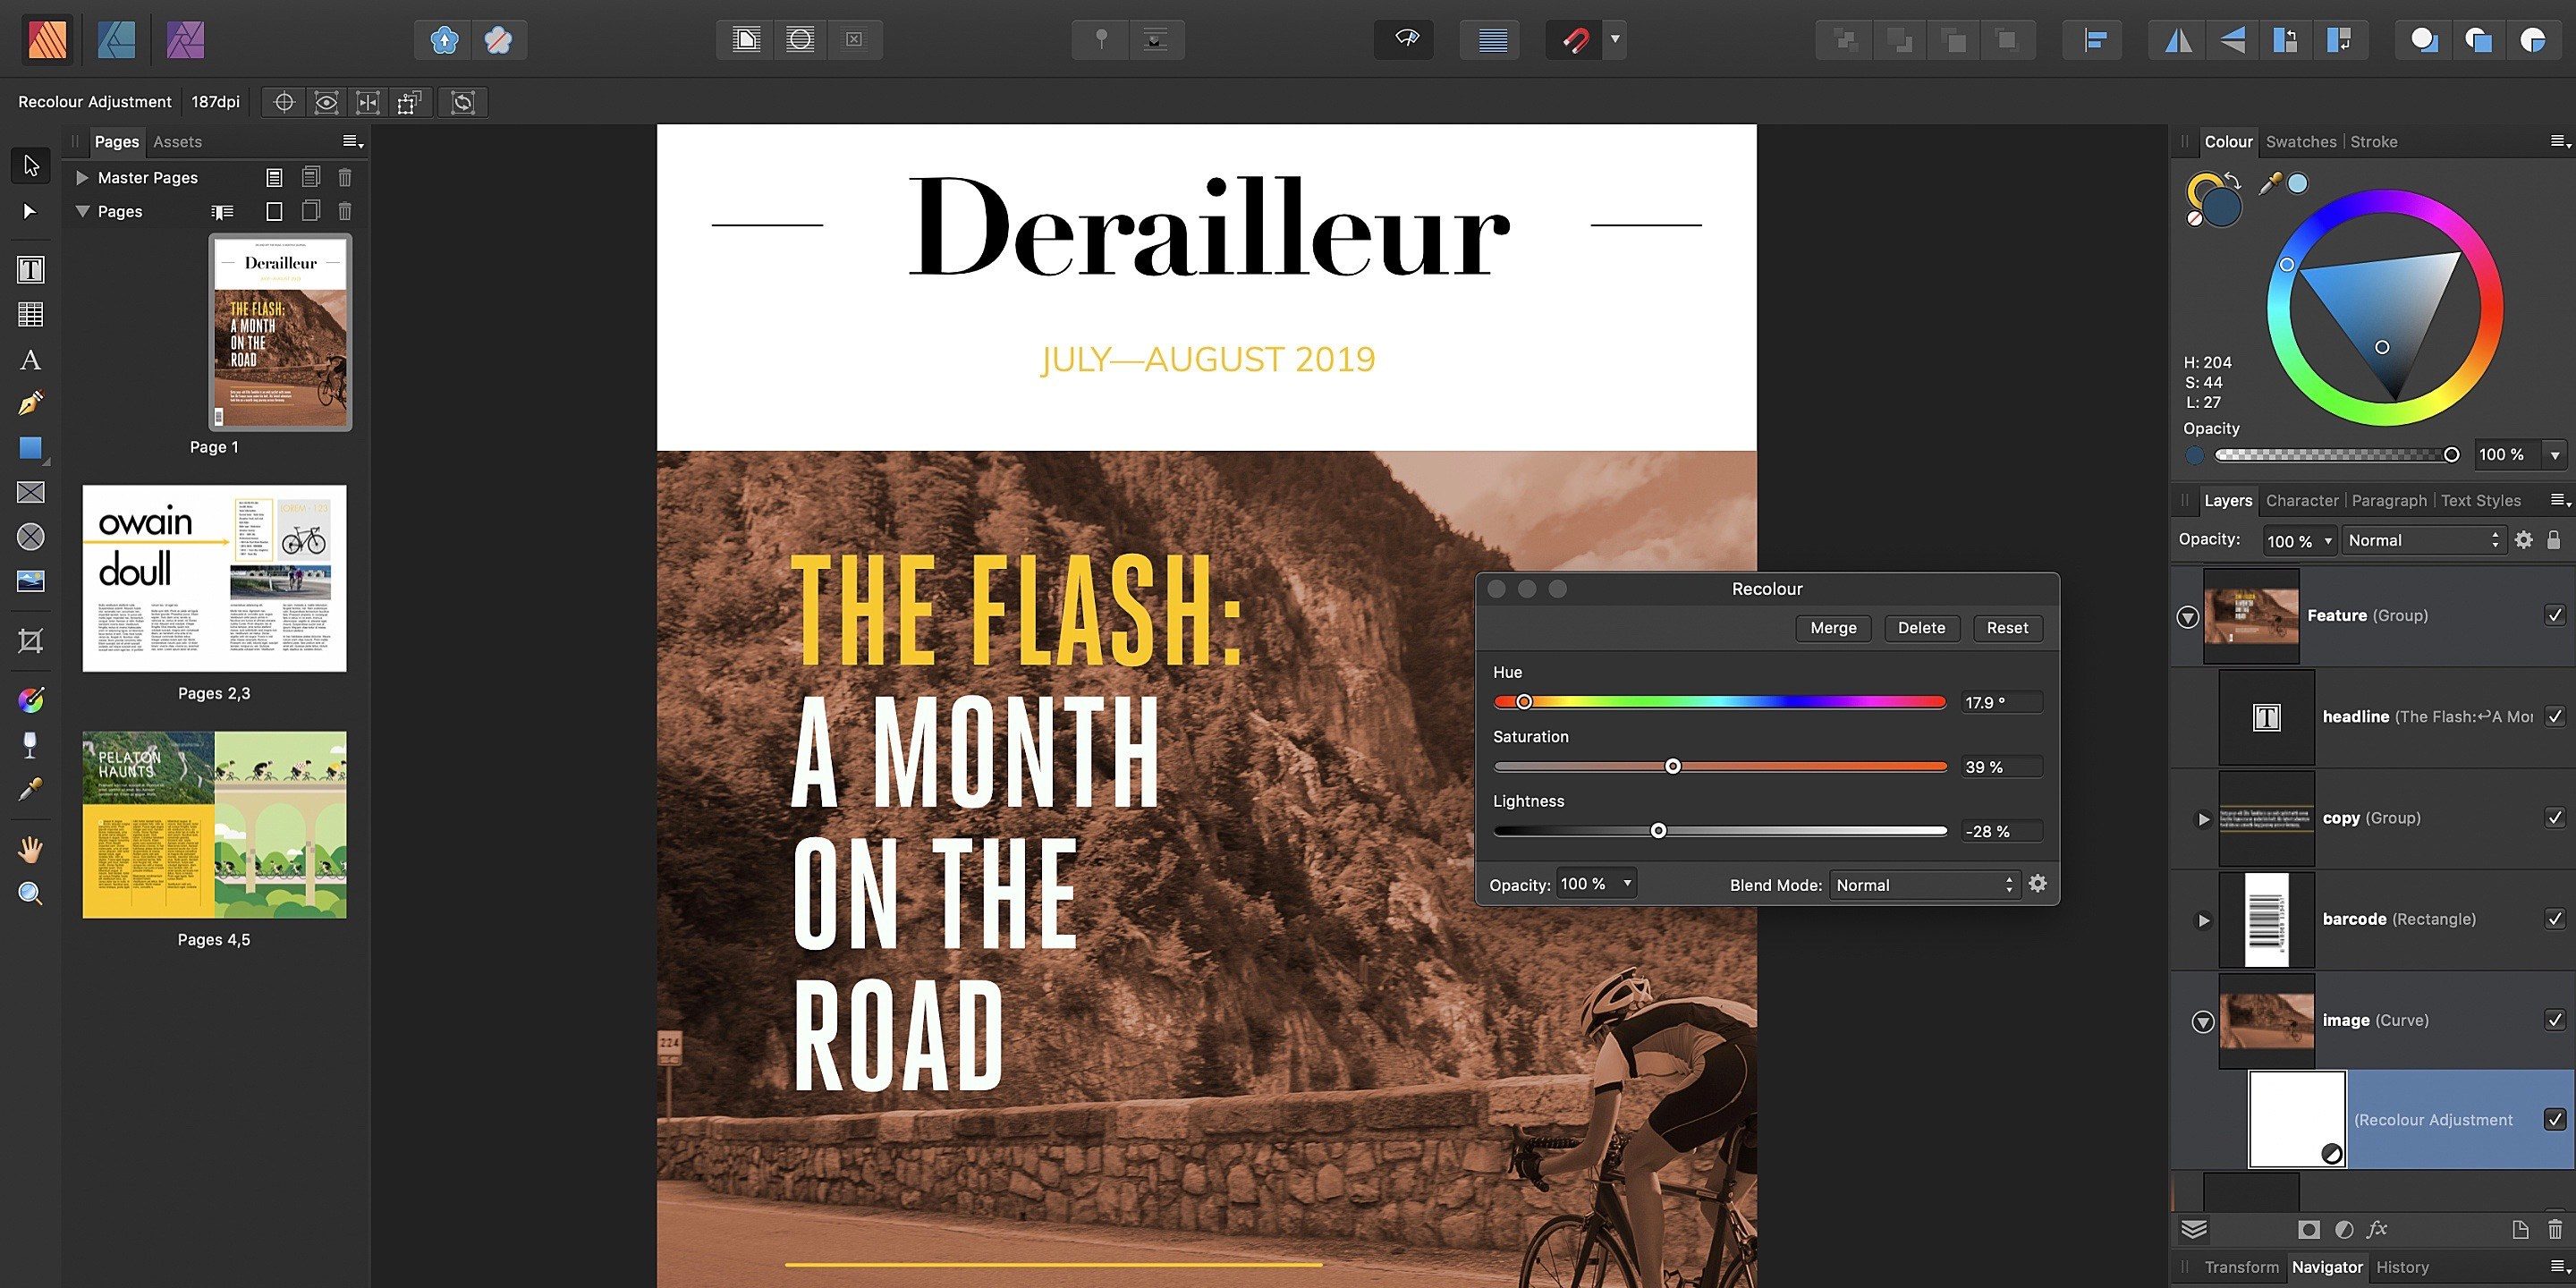 download the new version for android Serif Affinity Publisher 2.1.1.1847